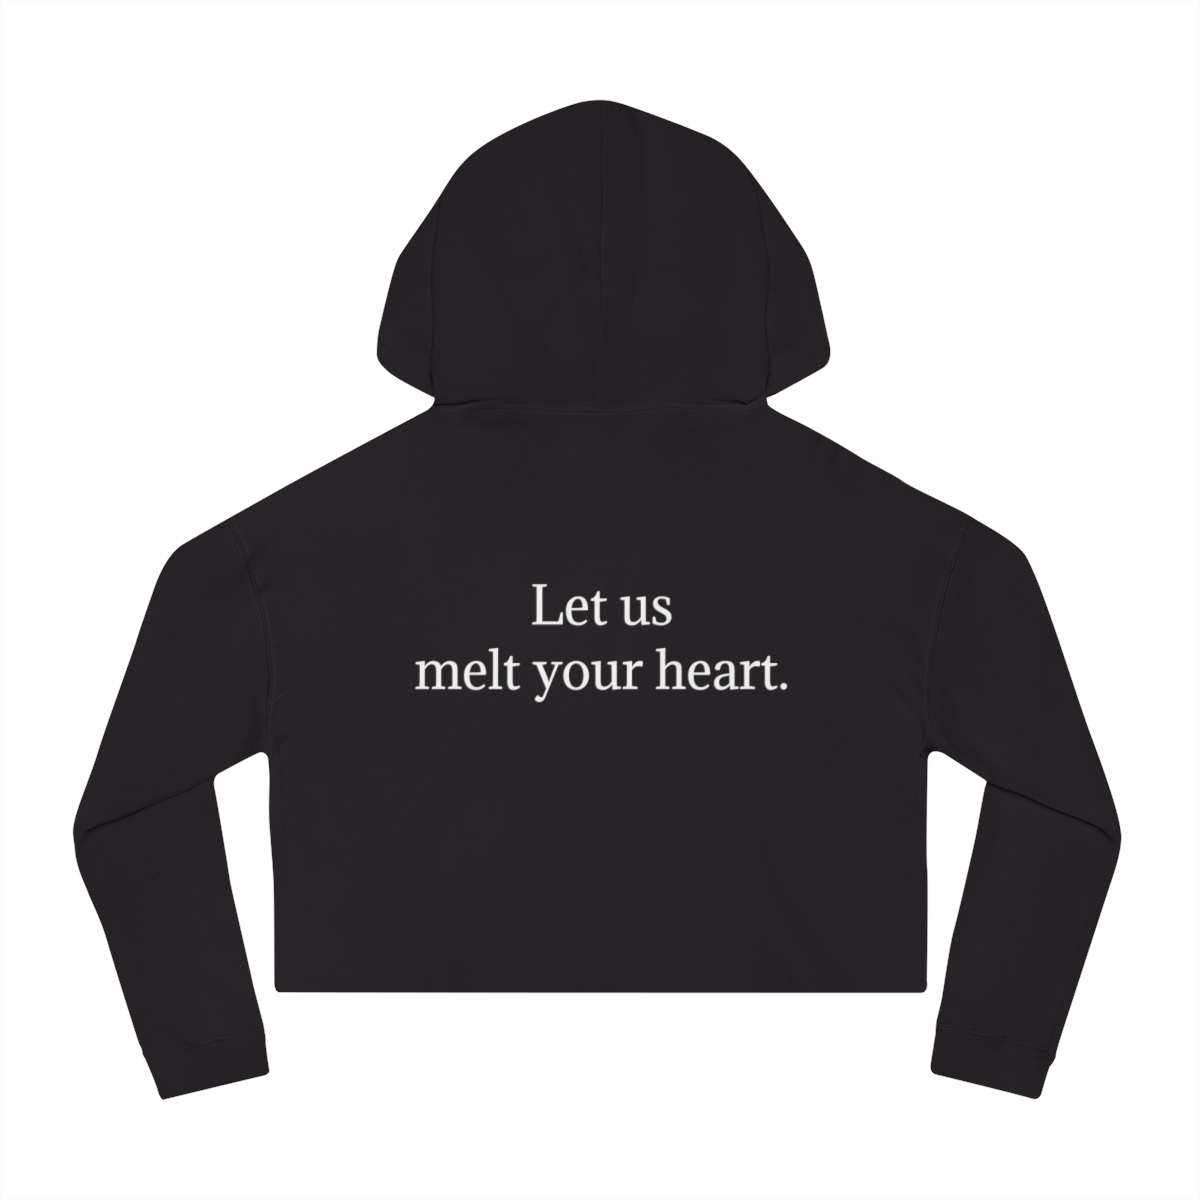 SNOWED IN Women’s Cropped Hooded Sweatshirt product thumbnail image